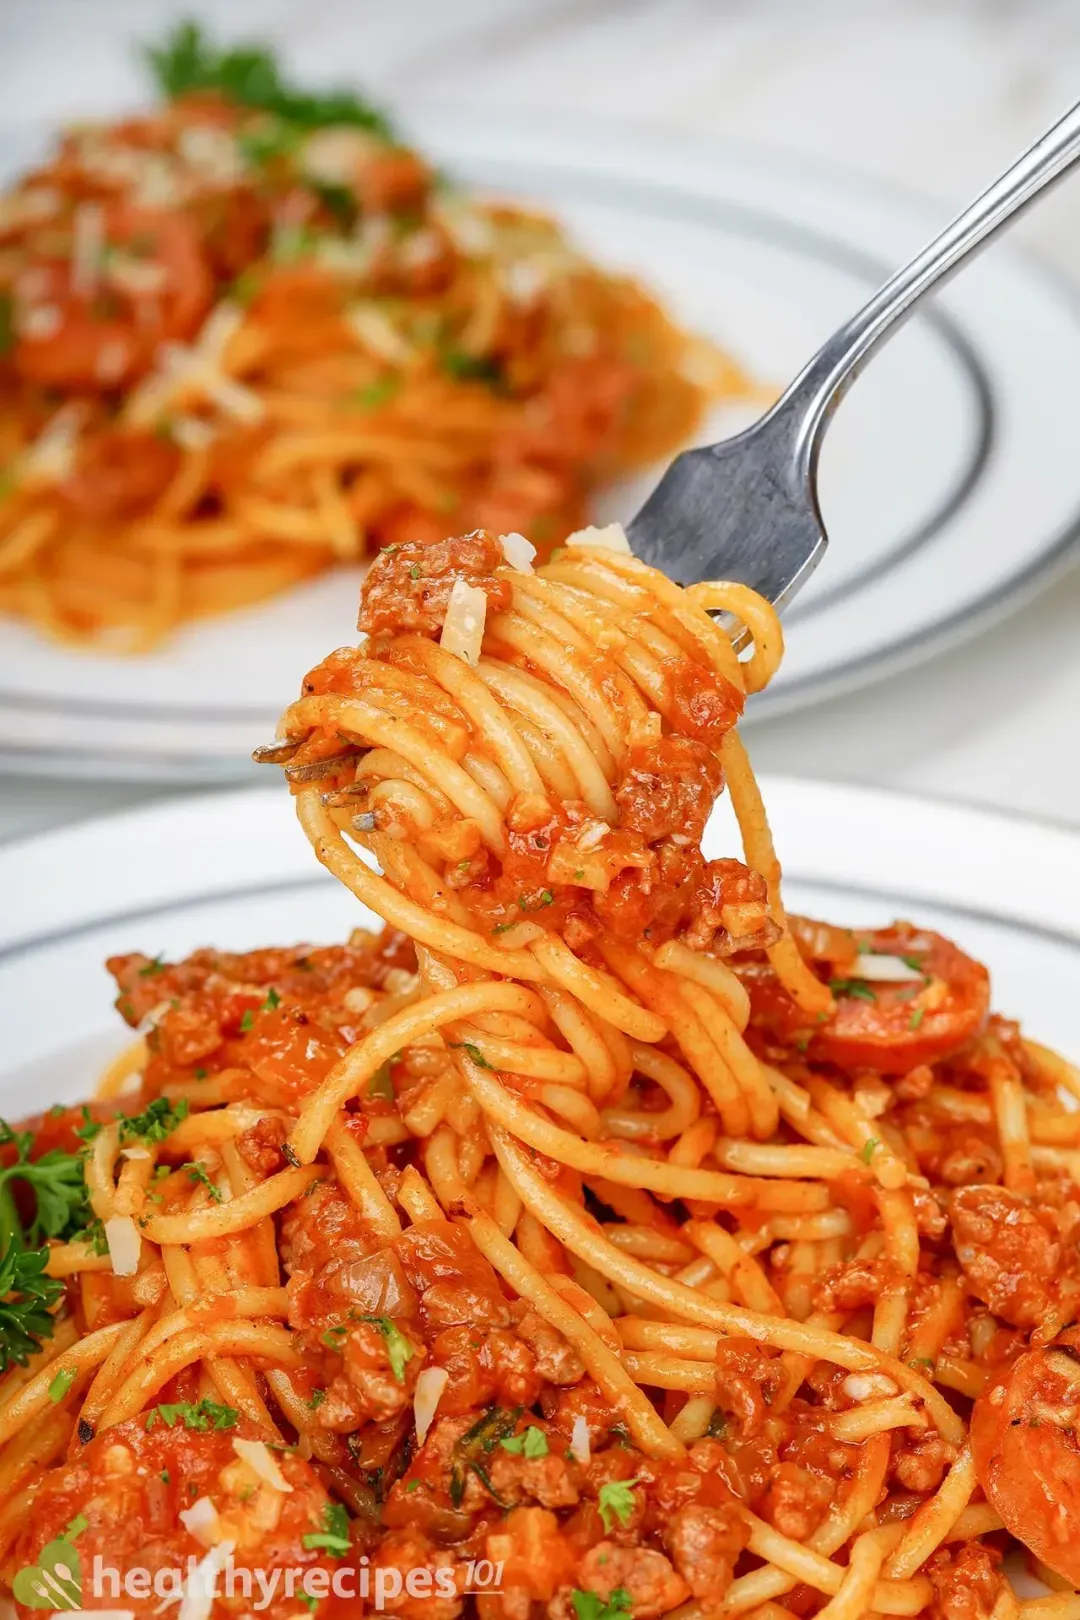 Is This Spaghetti With Sausage Recipe Healthy